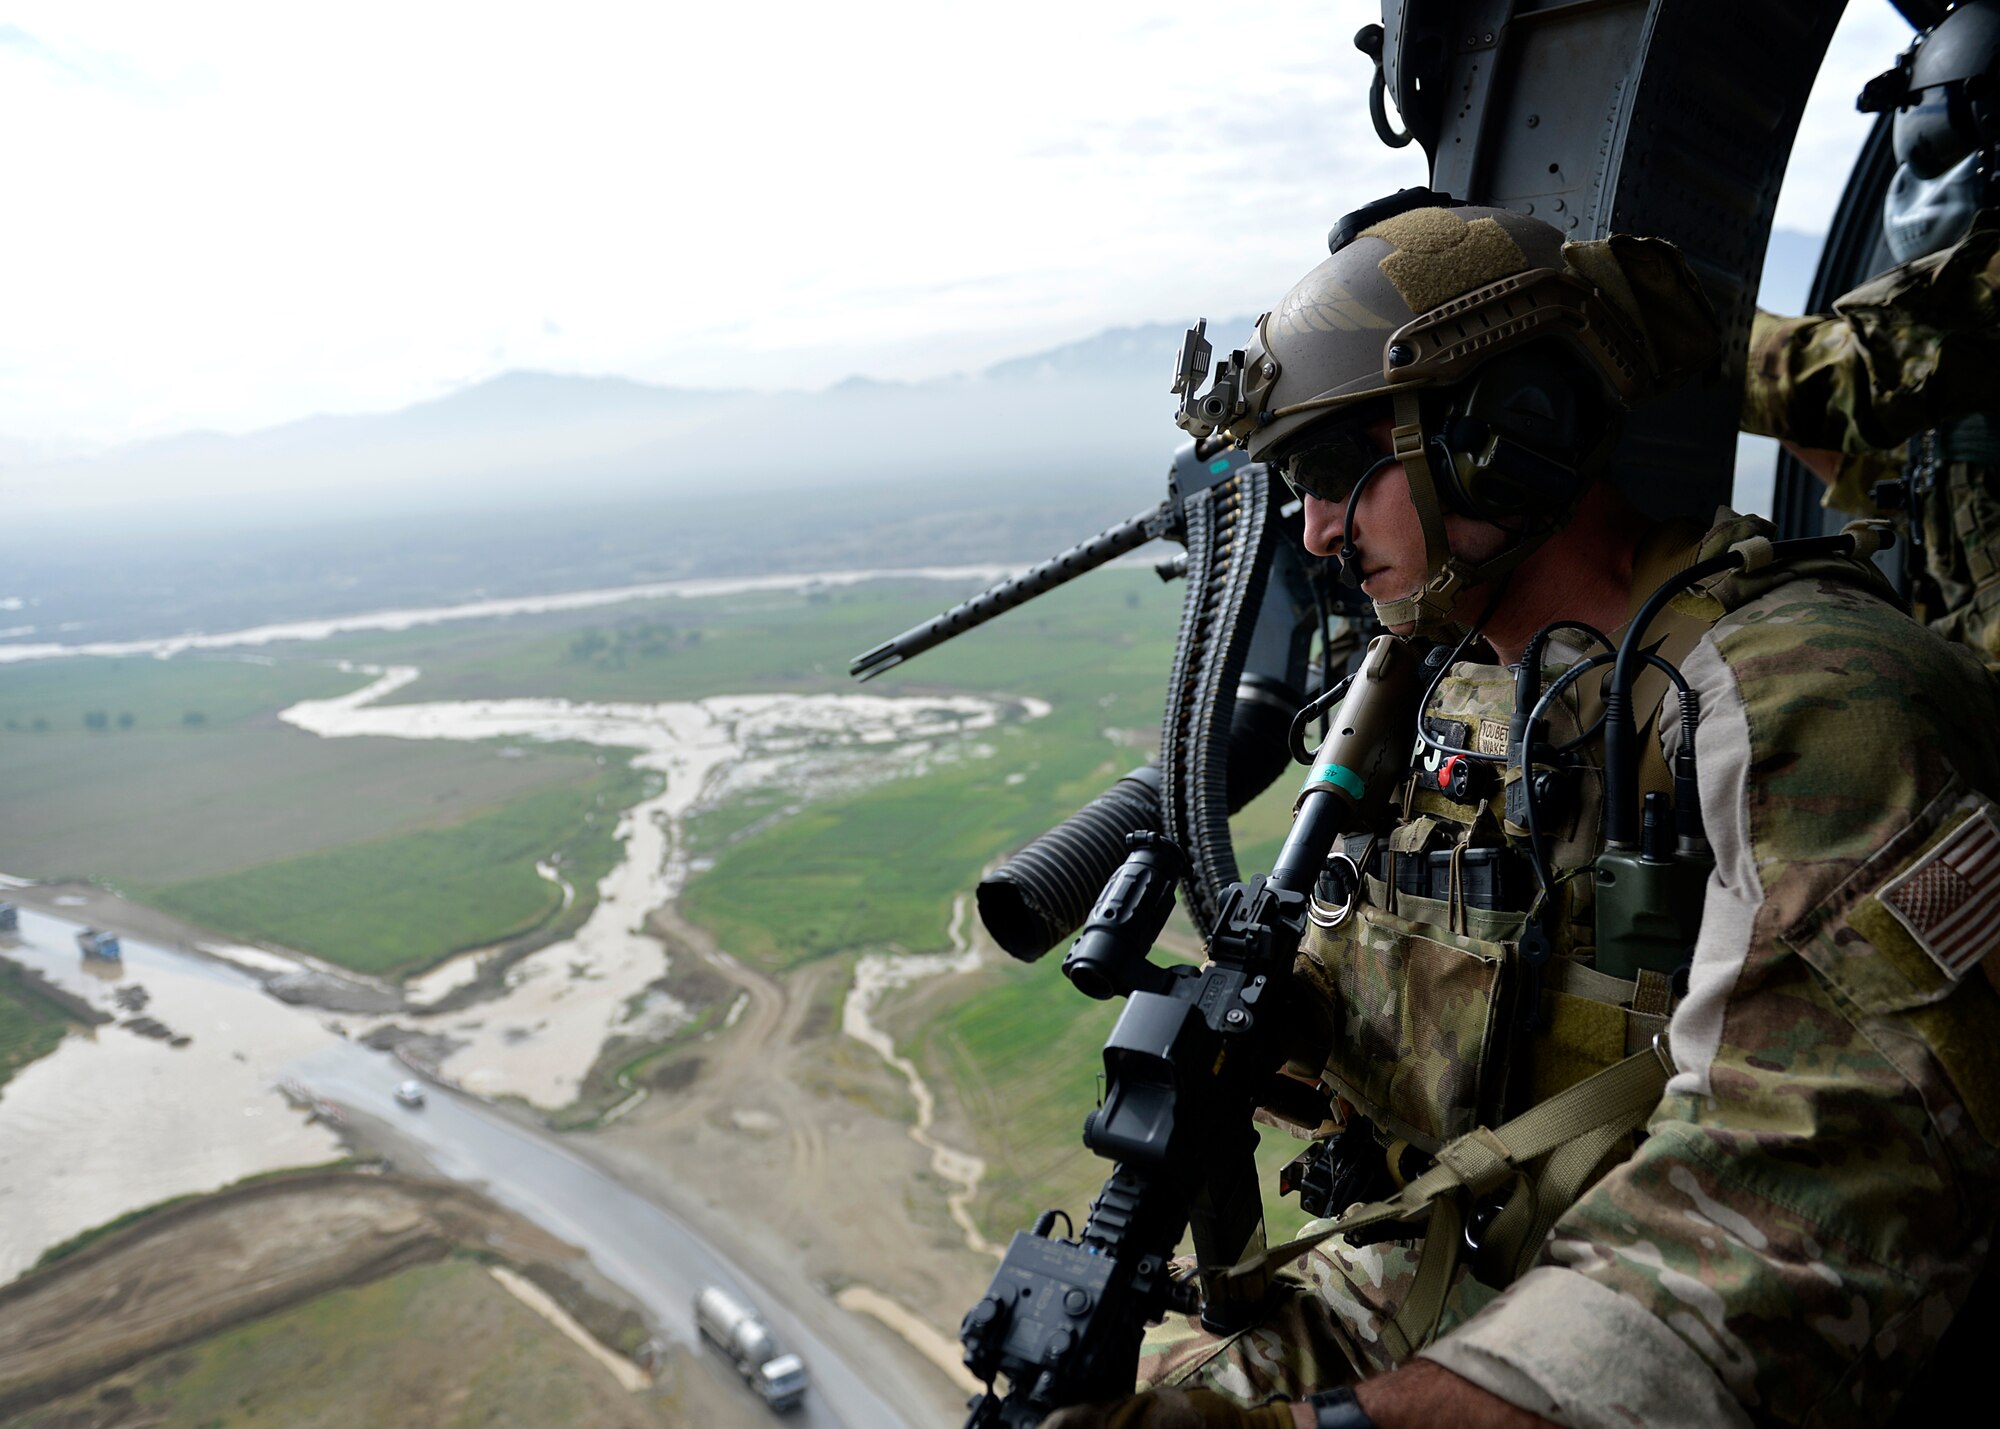 U.S. Air Force Senior Airman Derek Hemerick, 83rd Expeditionary Rescue Squadron, 455 Air Expeditionary Wing pararescueman, watches out the door of an HH-60G Pave Hawk helicopter at Bagram Airfield, Afghanistan May 5, 2014. The squadron participated in a training scenario where a vehicle simulated striking an Improvised Explosive Device.  During the training, rescue crews flew on HH-60G Pave Hawk helicopters to the simulated point of injury, provided security, treated patients, prepared them for travel, and safely departed the area.  Hemerick is a native of San Clemente, Calif. and is deployed from Moody Air Force Base, Ga. (U.S. Air Force photo by Staff Sgt. Evelyn Chavez/Released)